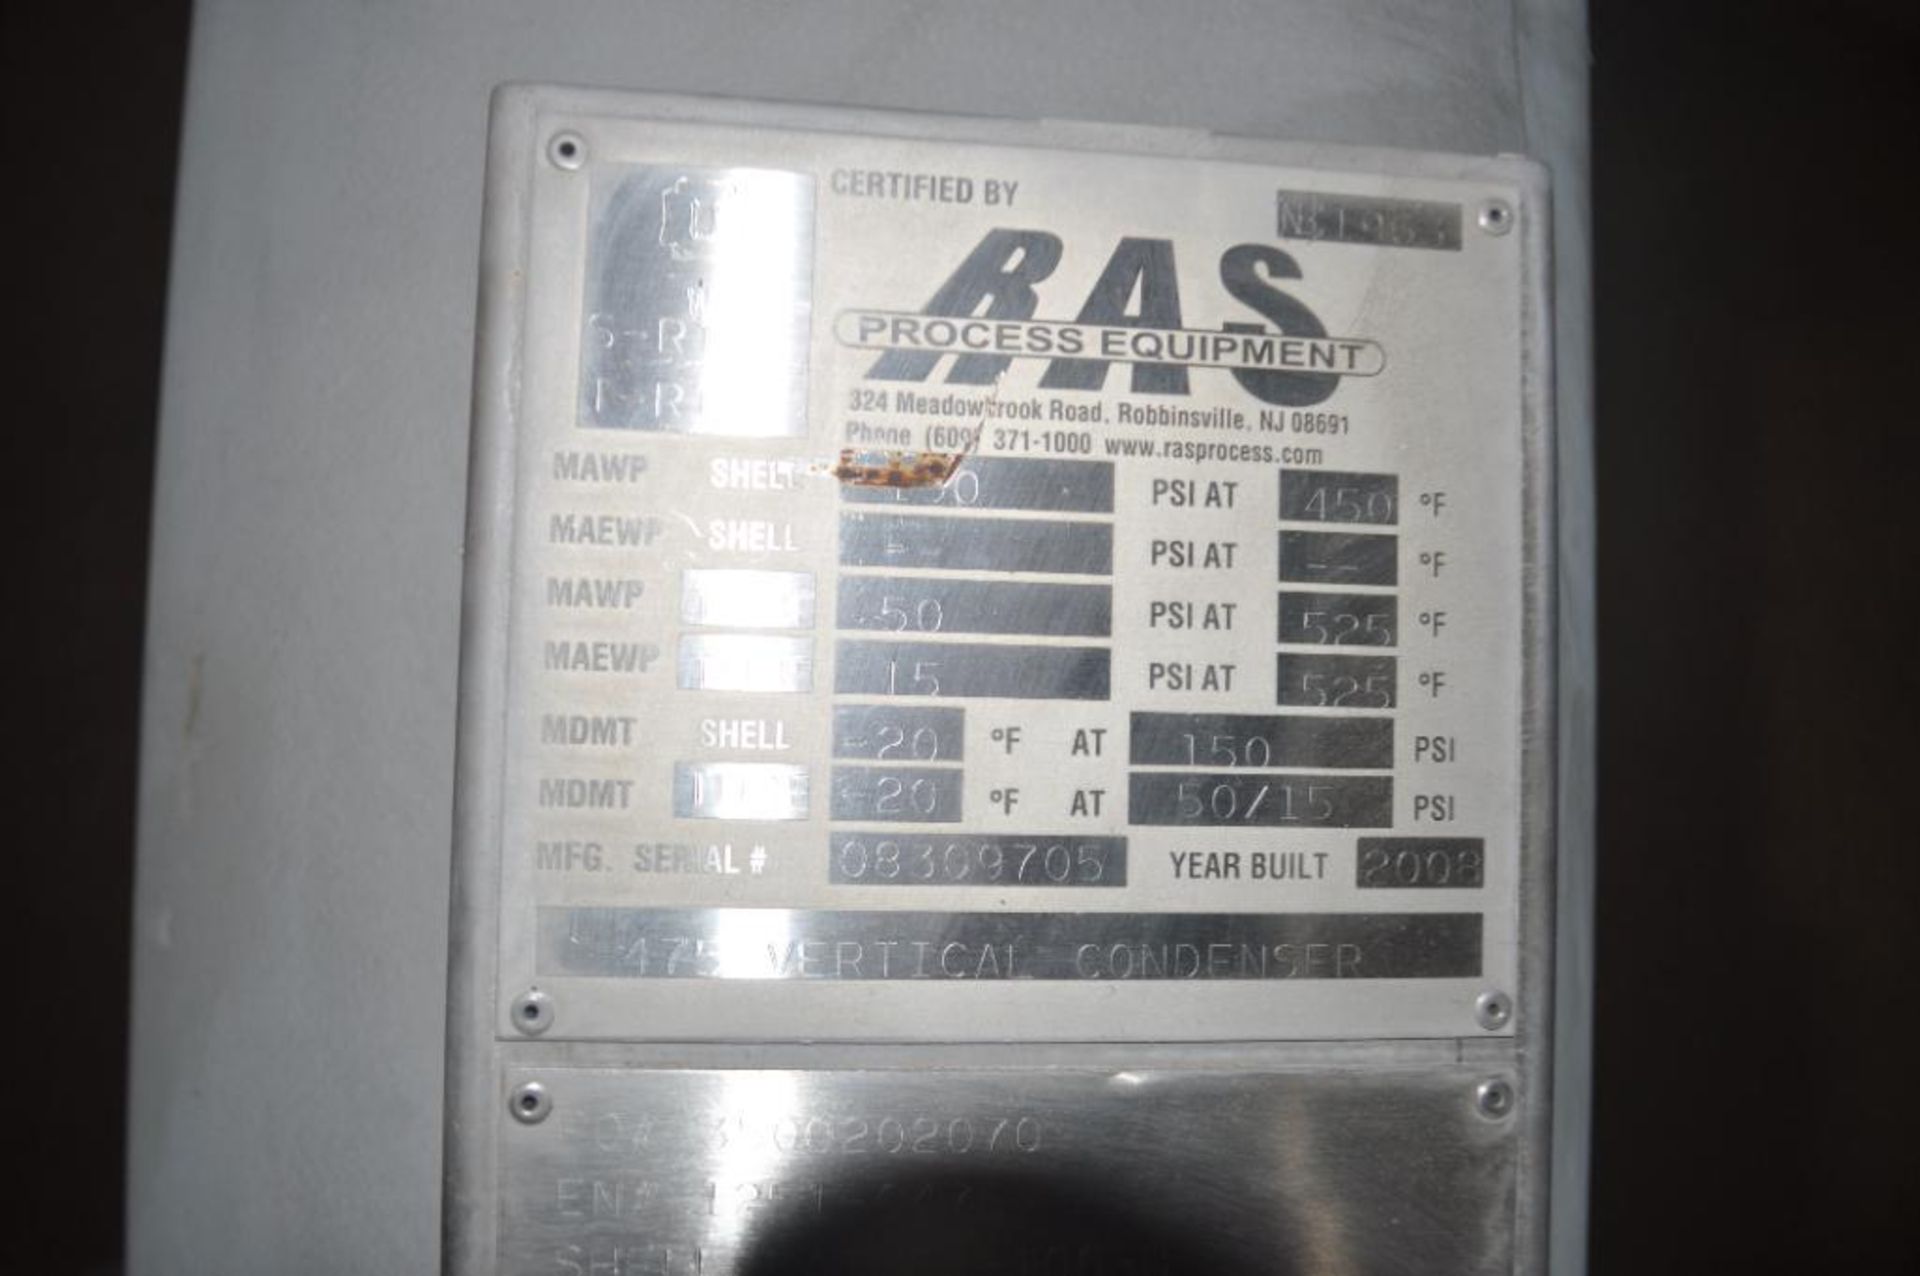 RAS DOUBLE PASS SHELL & TUBE HEAT EXCHANGER, HASTALLOY-C 276 TUBES, STEEL SHELL, 8'' INLET & OUTLET, - Image 14 of 14